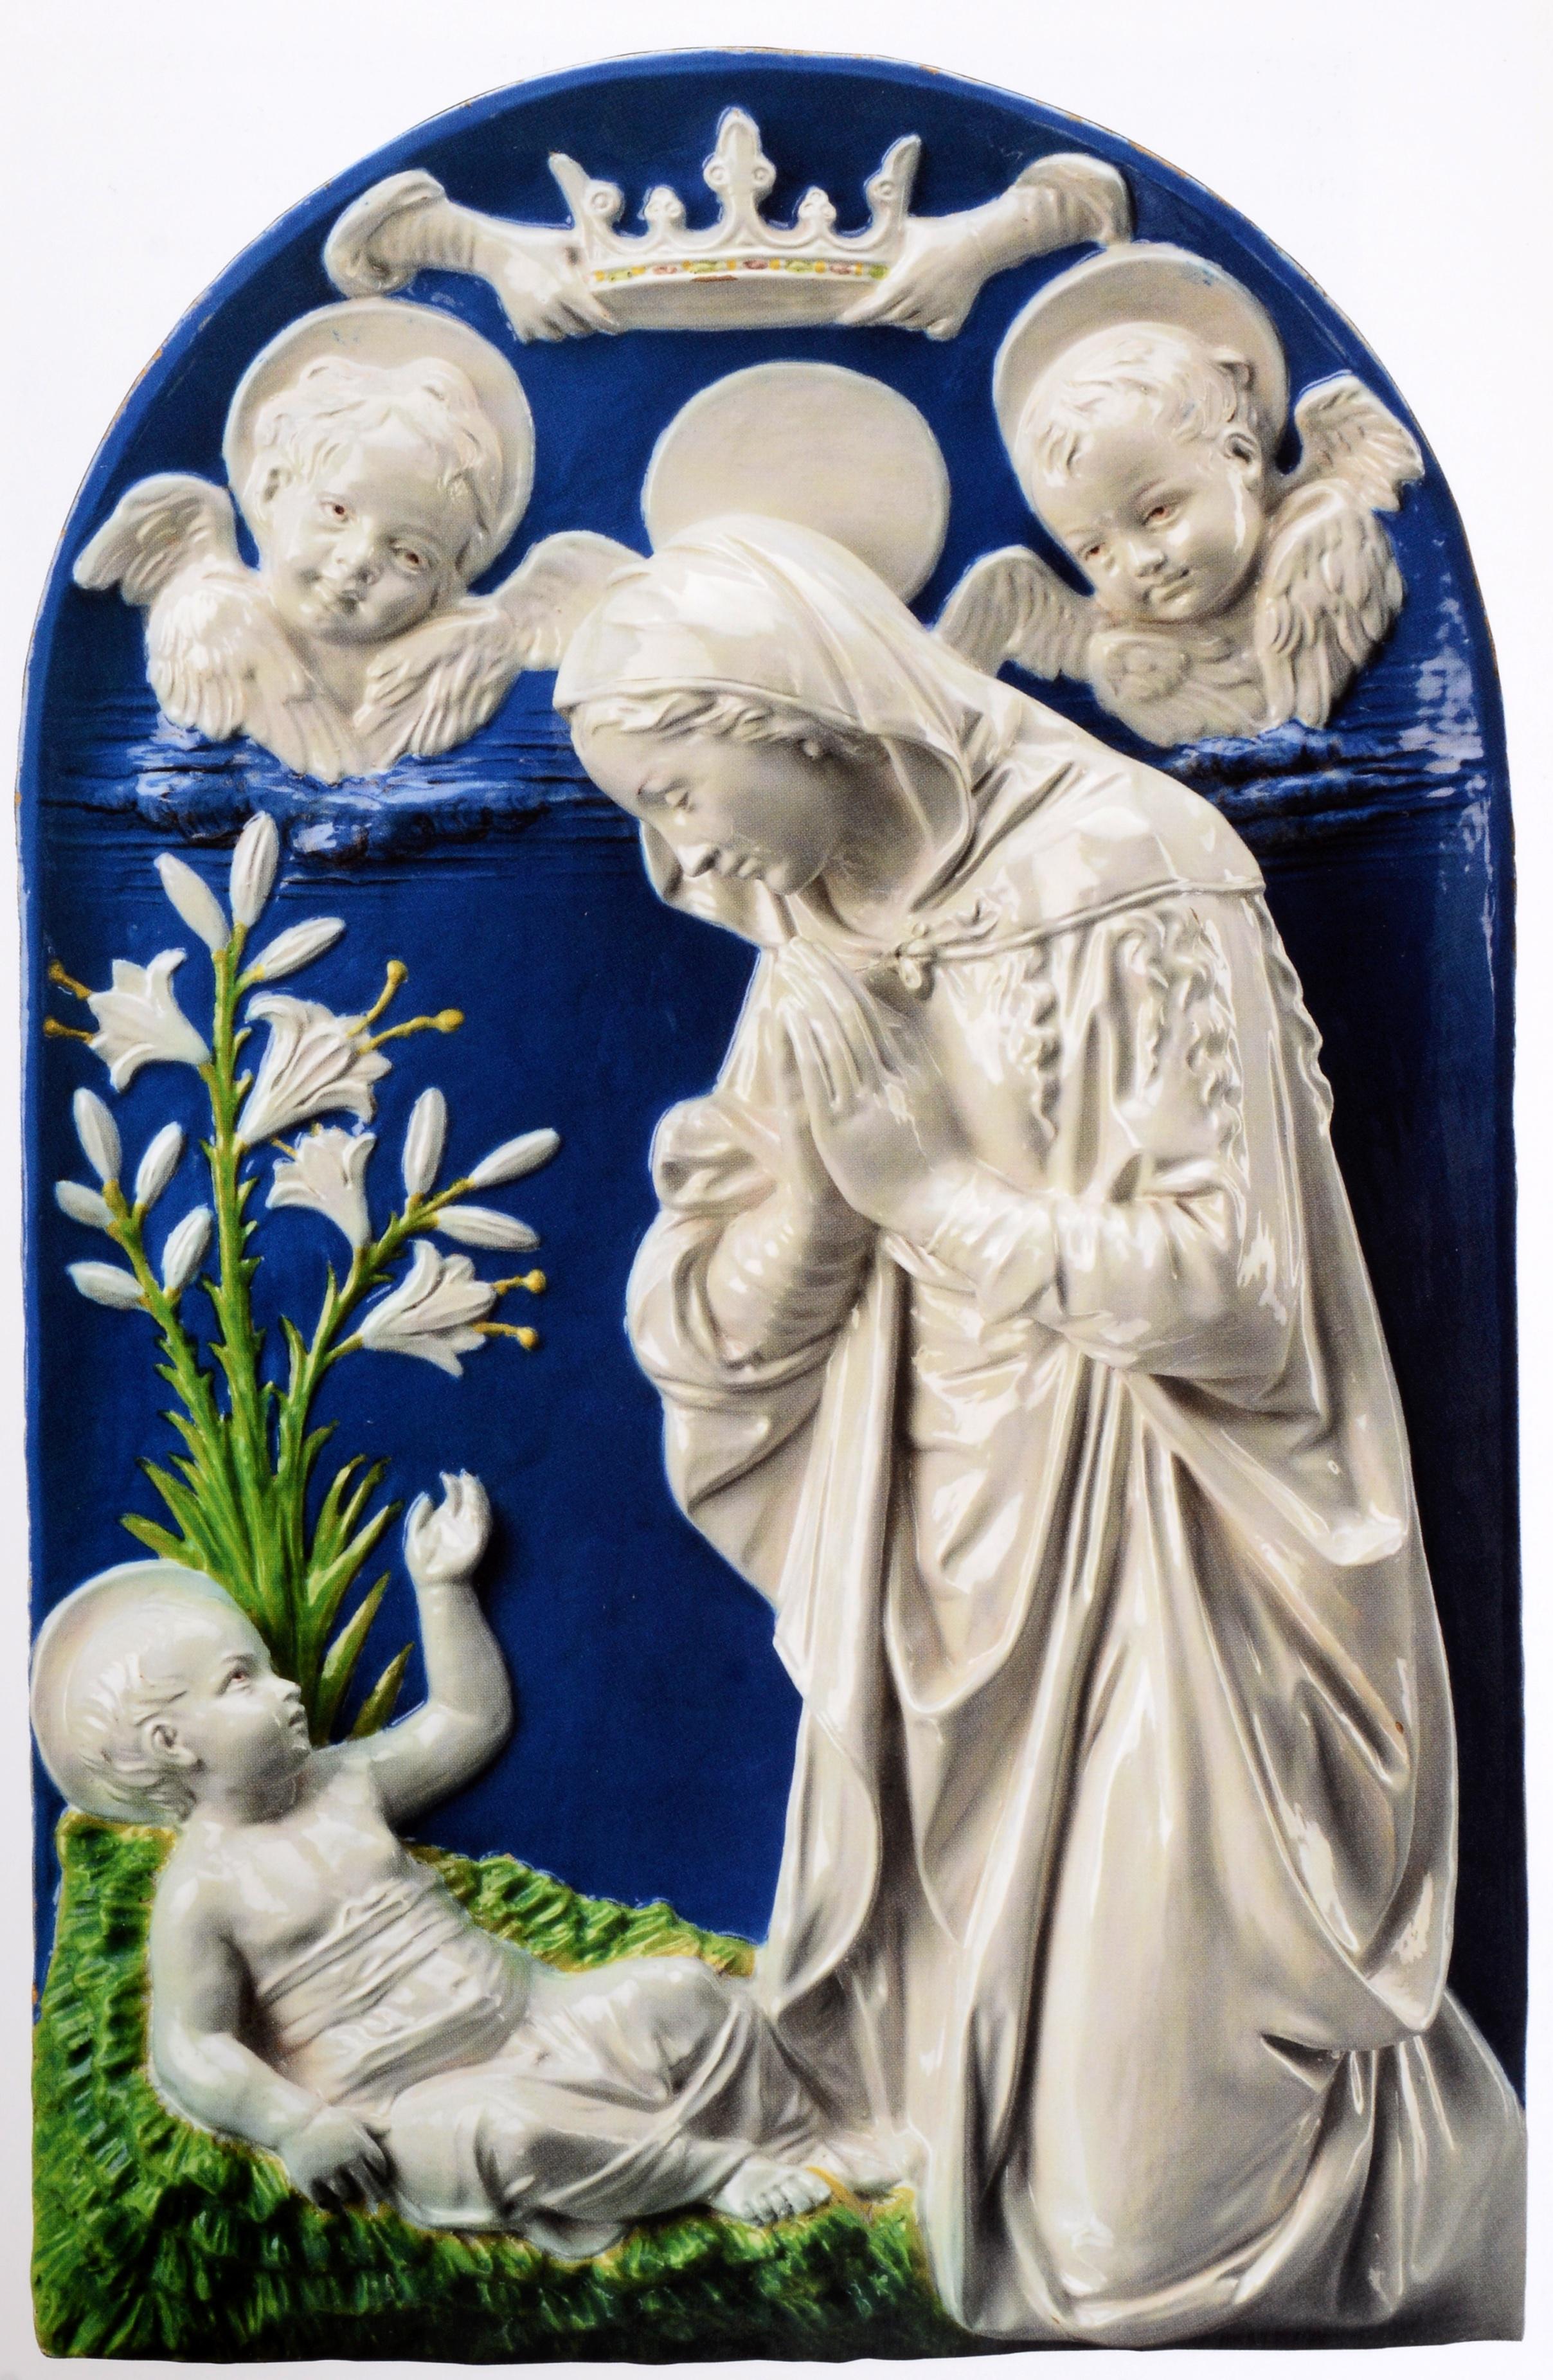 Della Robbia: Sculpting with Color in Renaissance Florence by Marietta Cambareri. MFA Publications, Museum of Fine Arts Boston, 2016. Stated 1st Ed hardcover with dust jacket. For exhibition August 9–December 4, 2016. The glazed terra-cotta